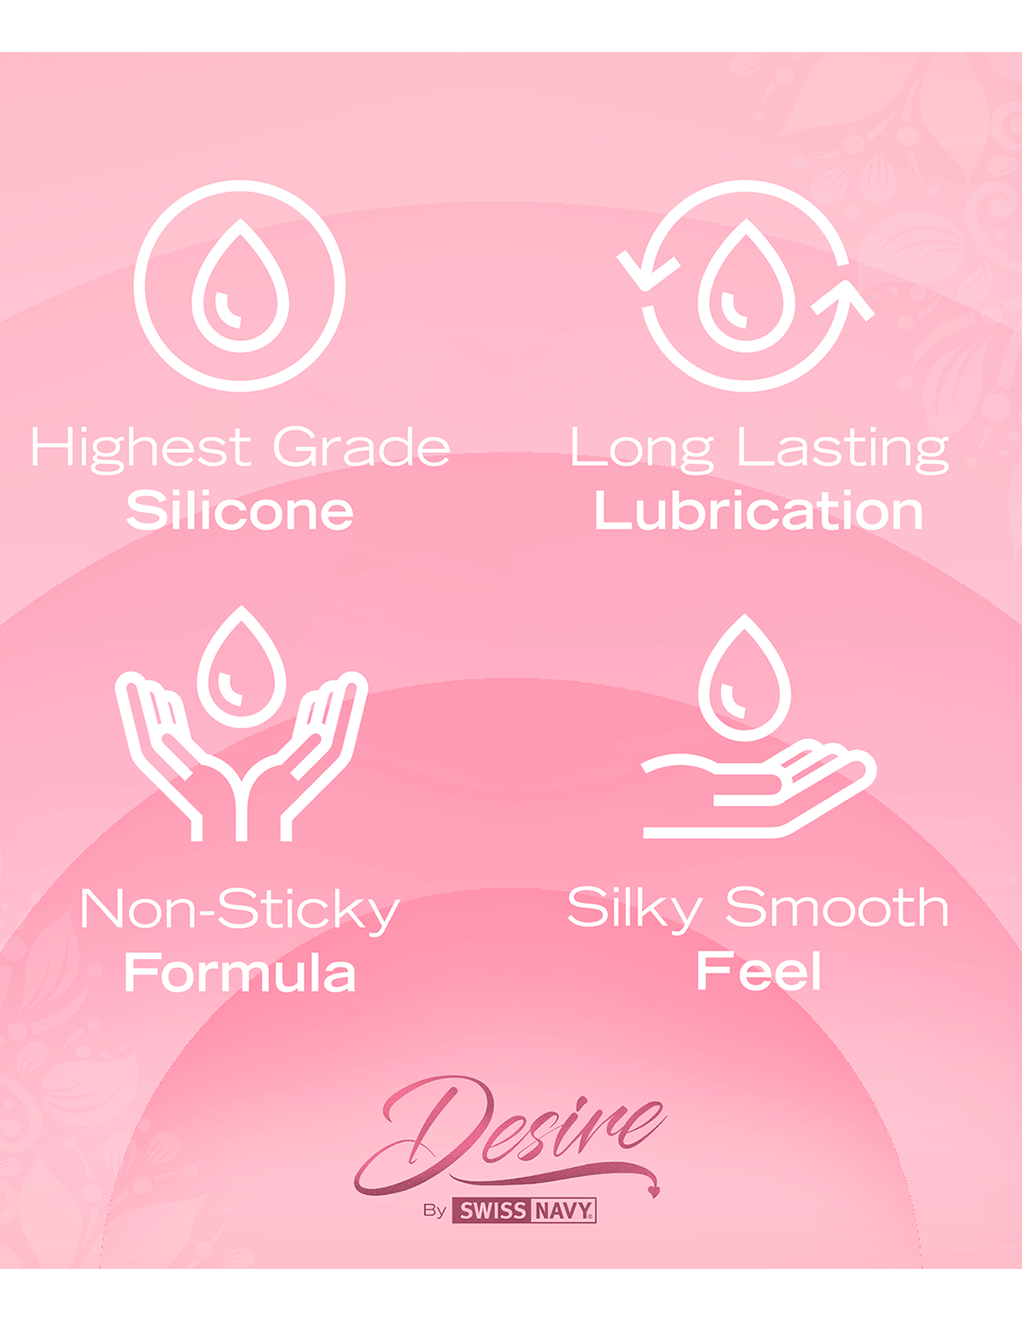 Desire Silicone Based Lubricant - Information